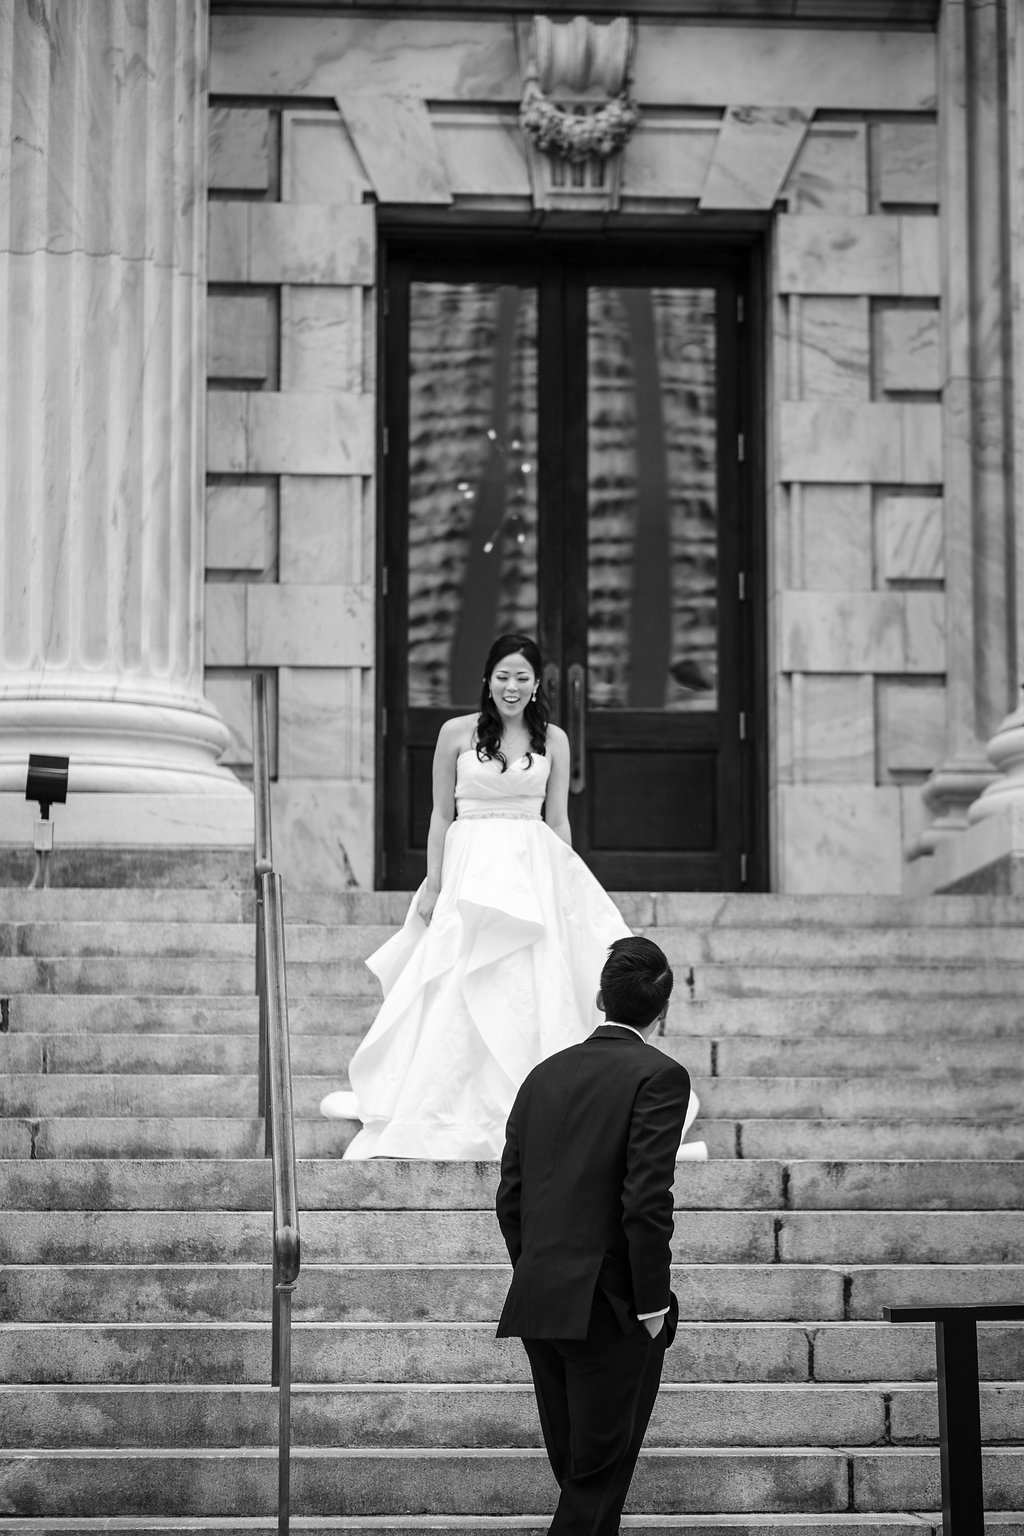 Outdoor Bride and Groom Wedding Portrait on the Stairs at Tampa Venue Le Meridien | Tampa Bay Photographer Marc Edwards Photography